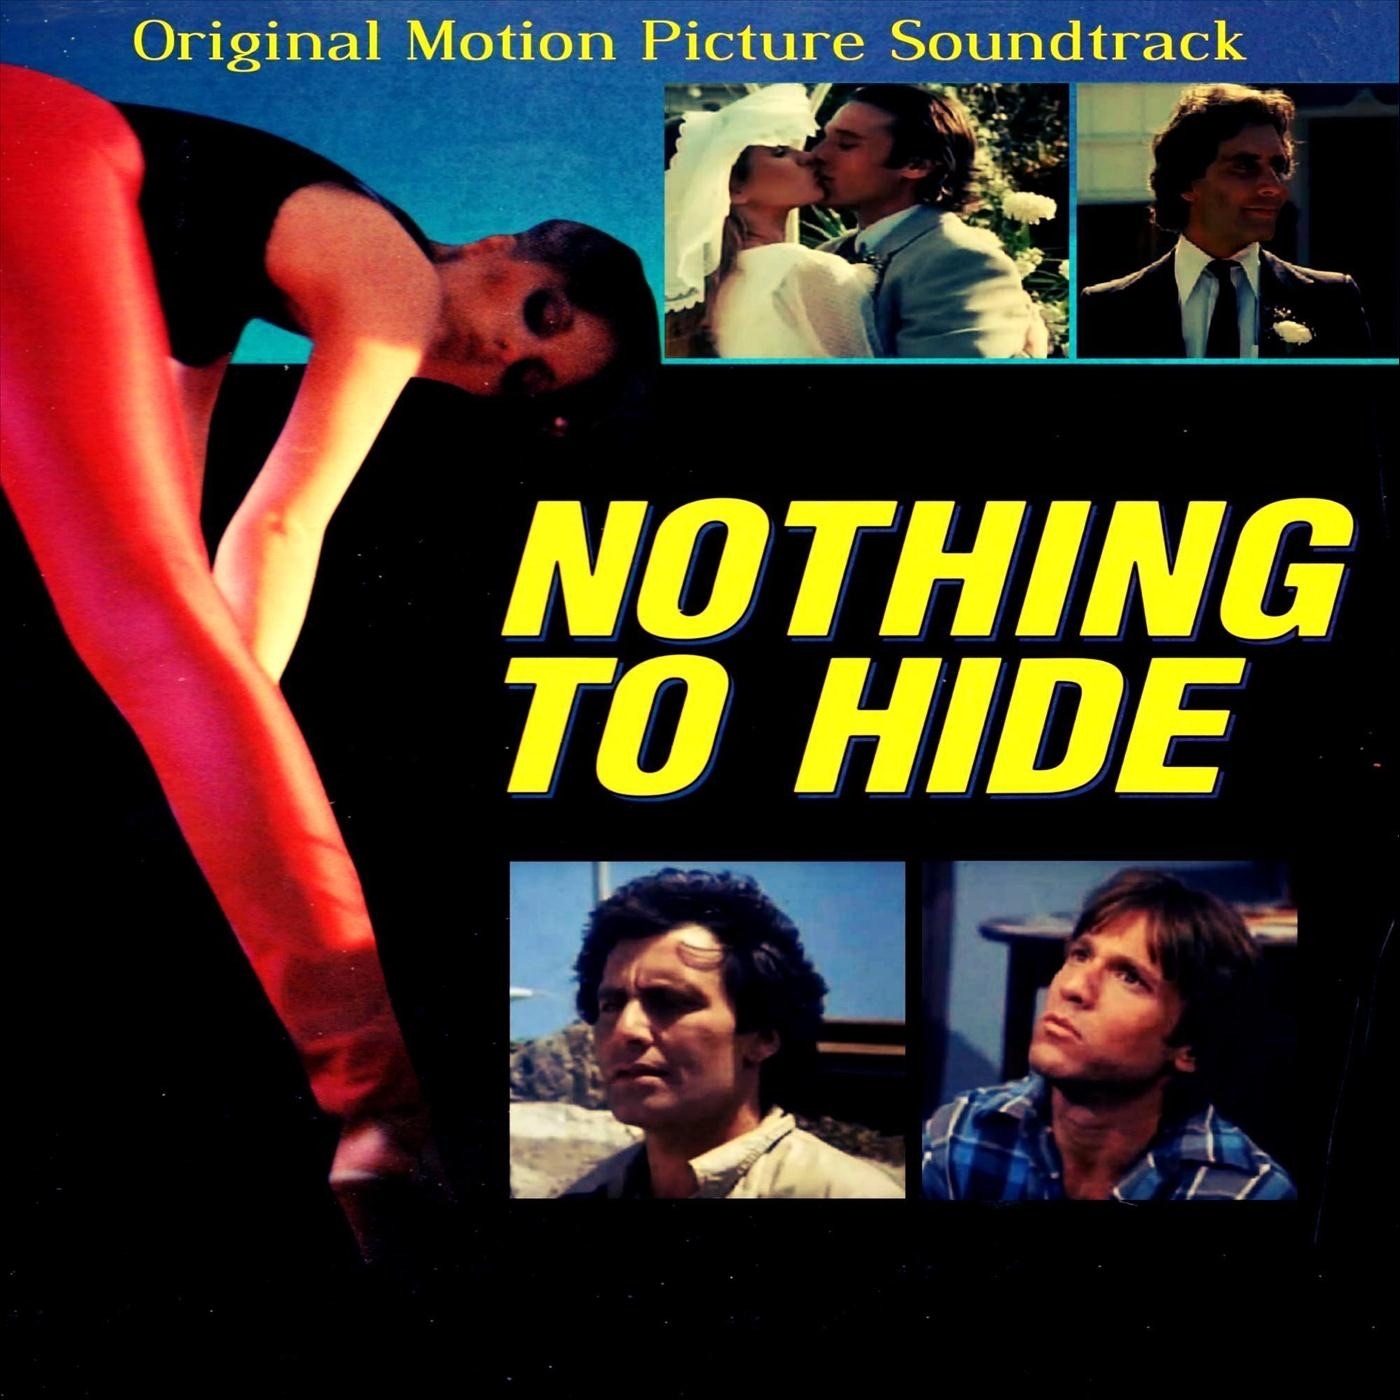 Nothing to hide 1981 movie